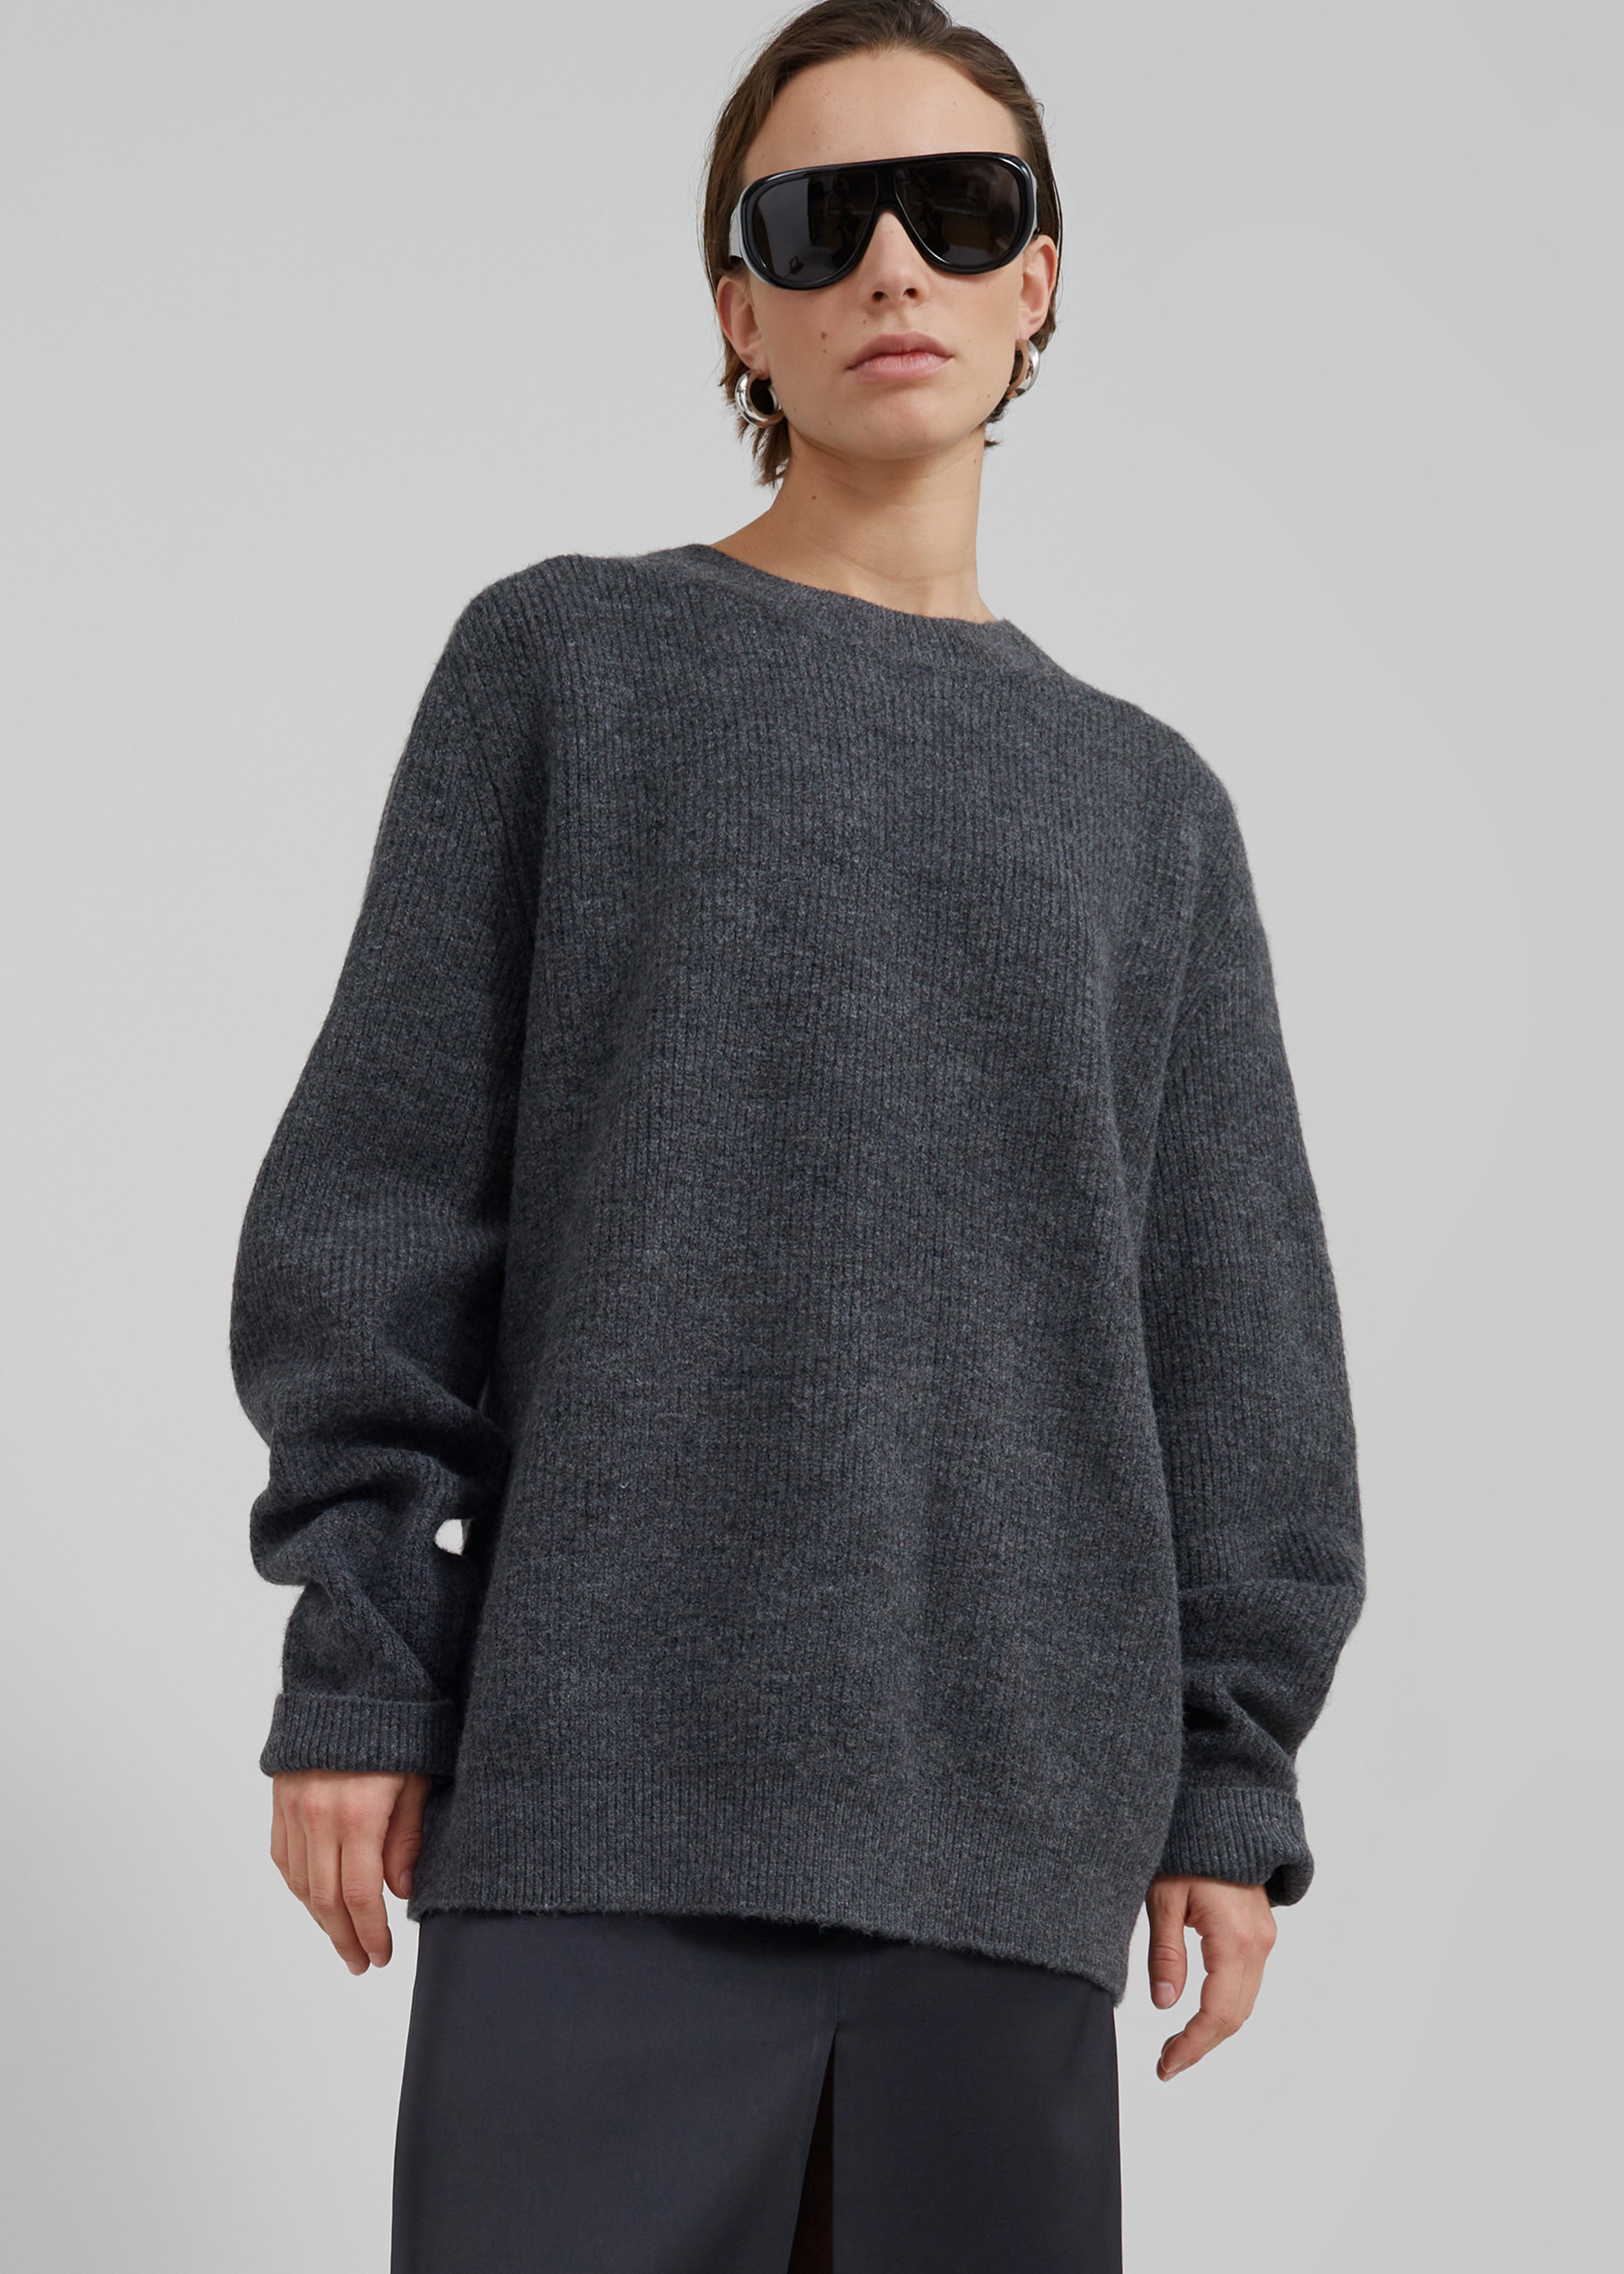 Emory Sweater - Charcoal - 2